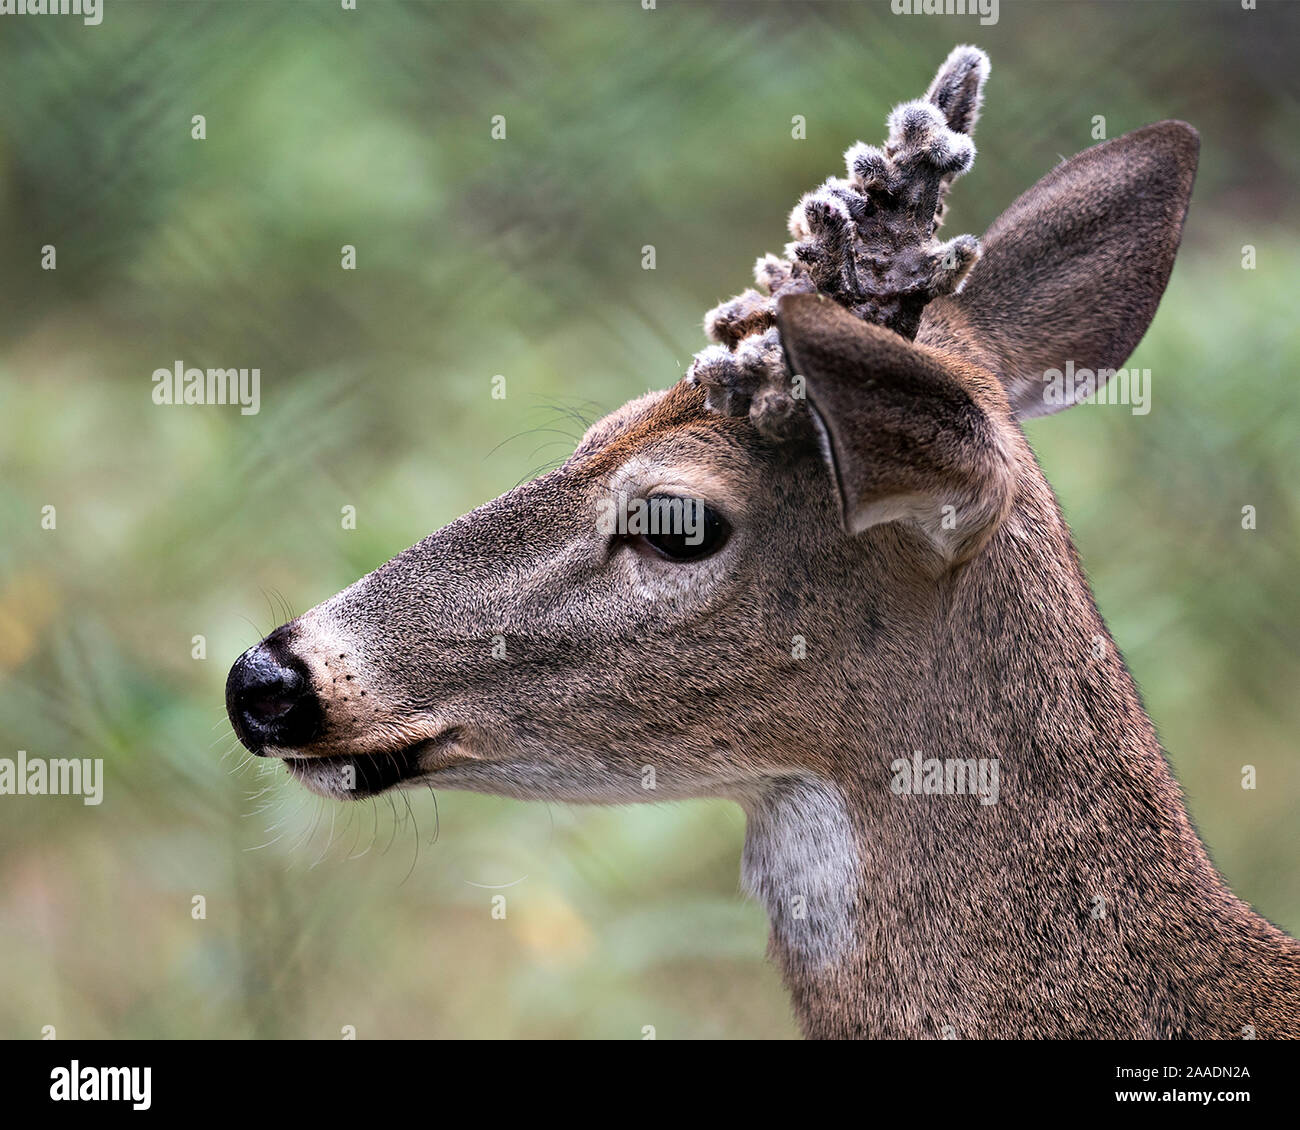 Deer (Florida Key Deer) close-up head view exposing its head, antlers,ears, eyes, nose, in its environment and surrounding with a bokeh background. Stock Photo